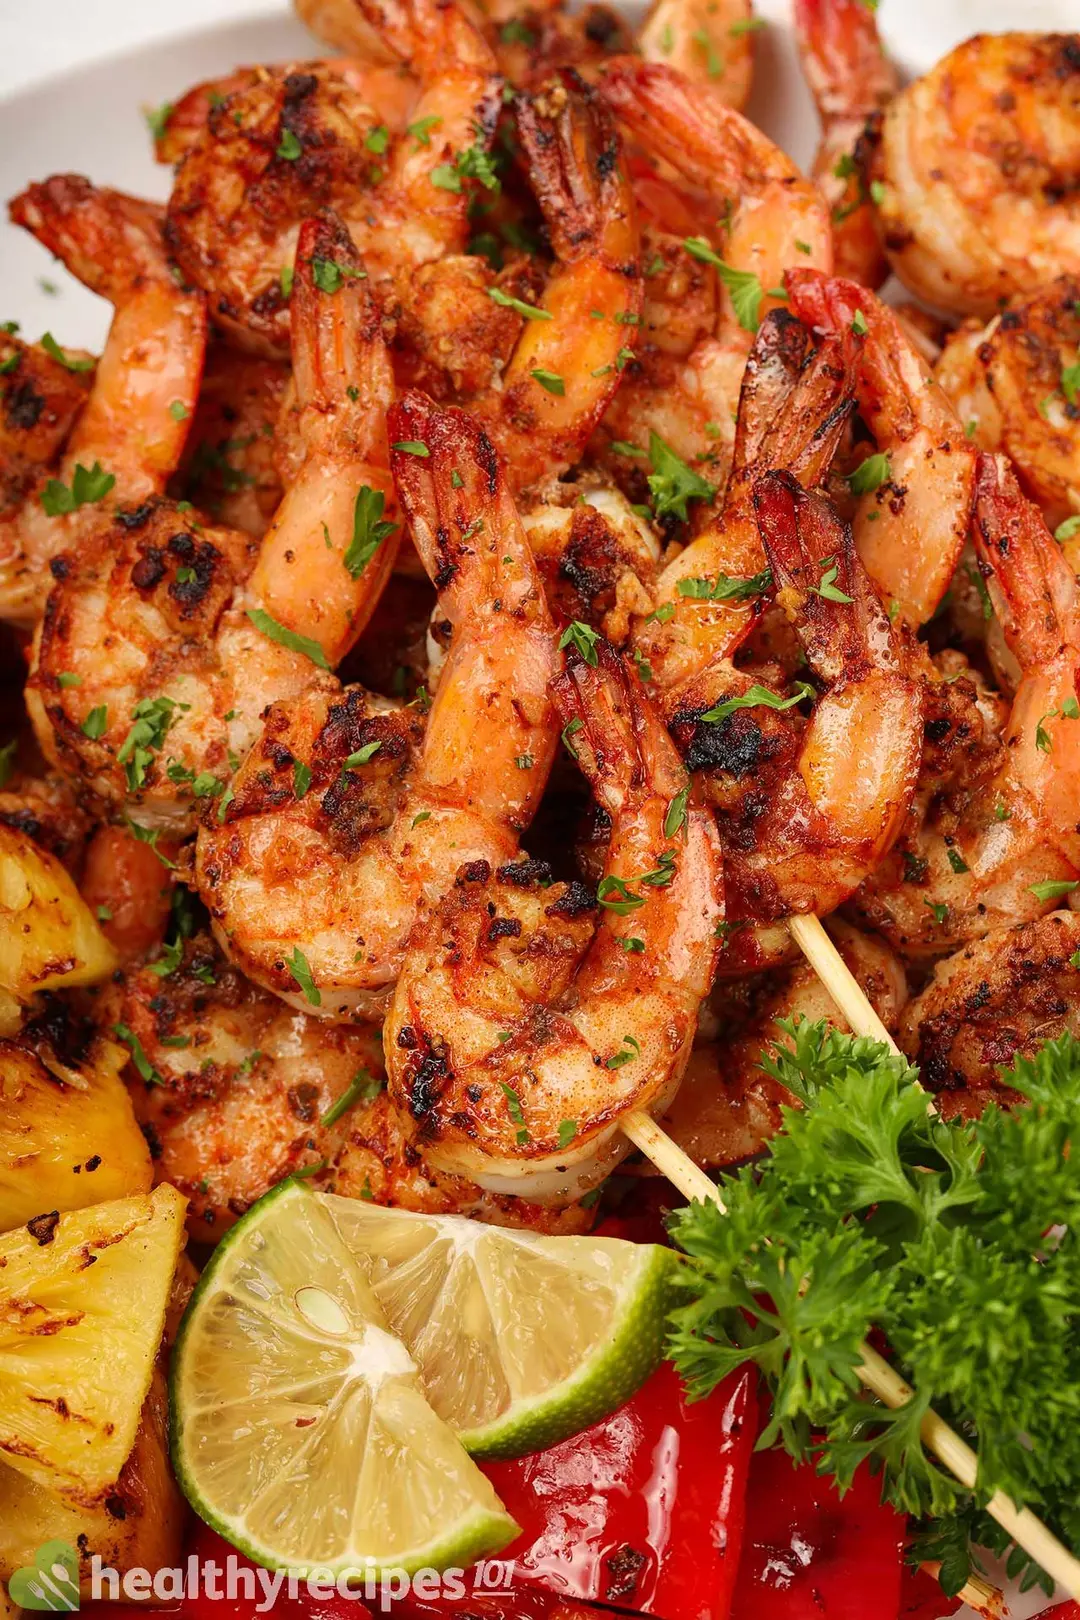 How to Clean Shrimp for Grilling